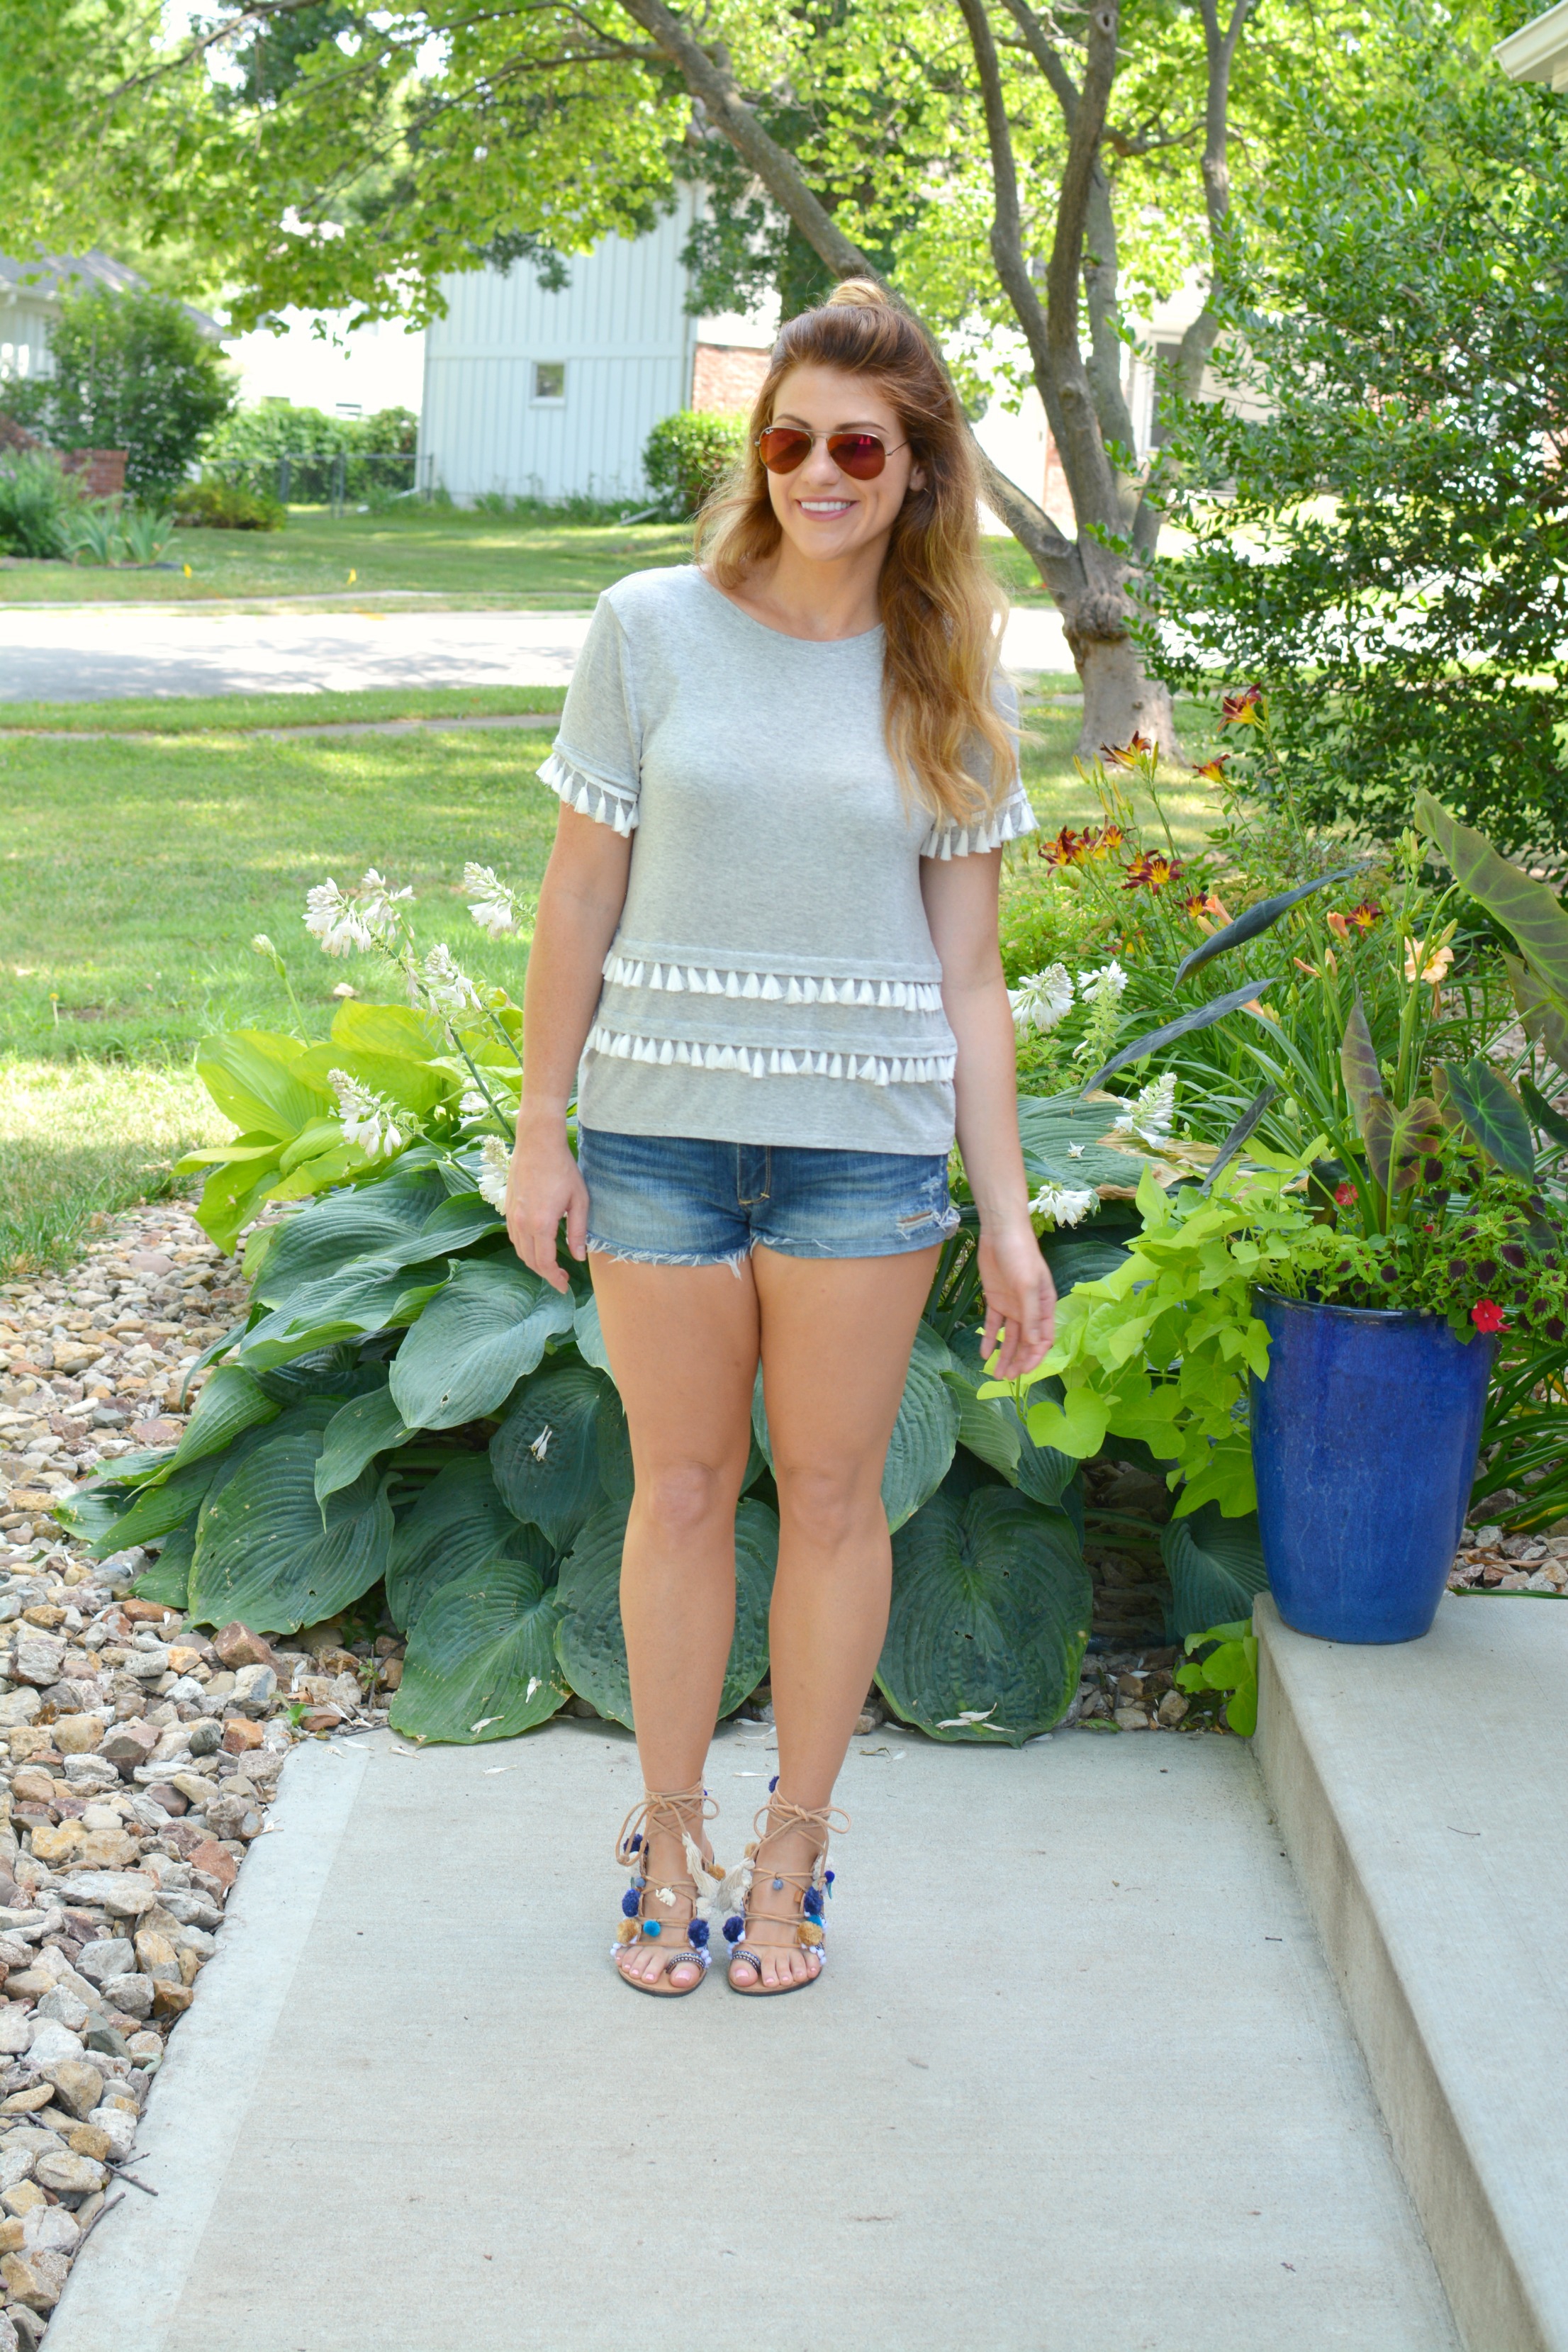 Tassel Tee + Pom Pom Lace-up Sandals. | Le Stylo Rouge